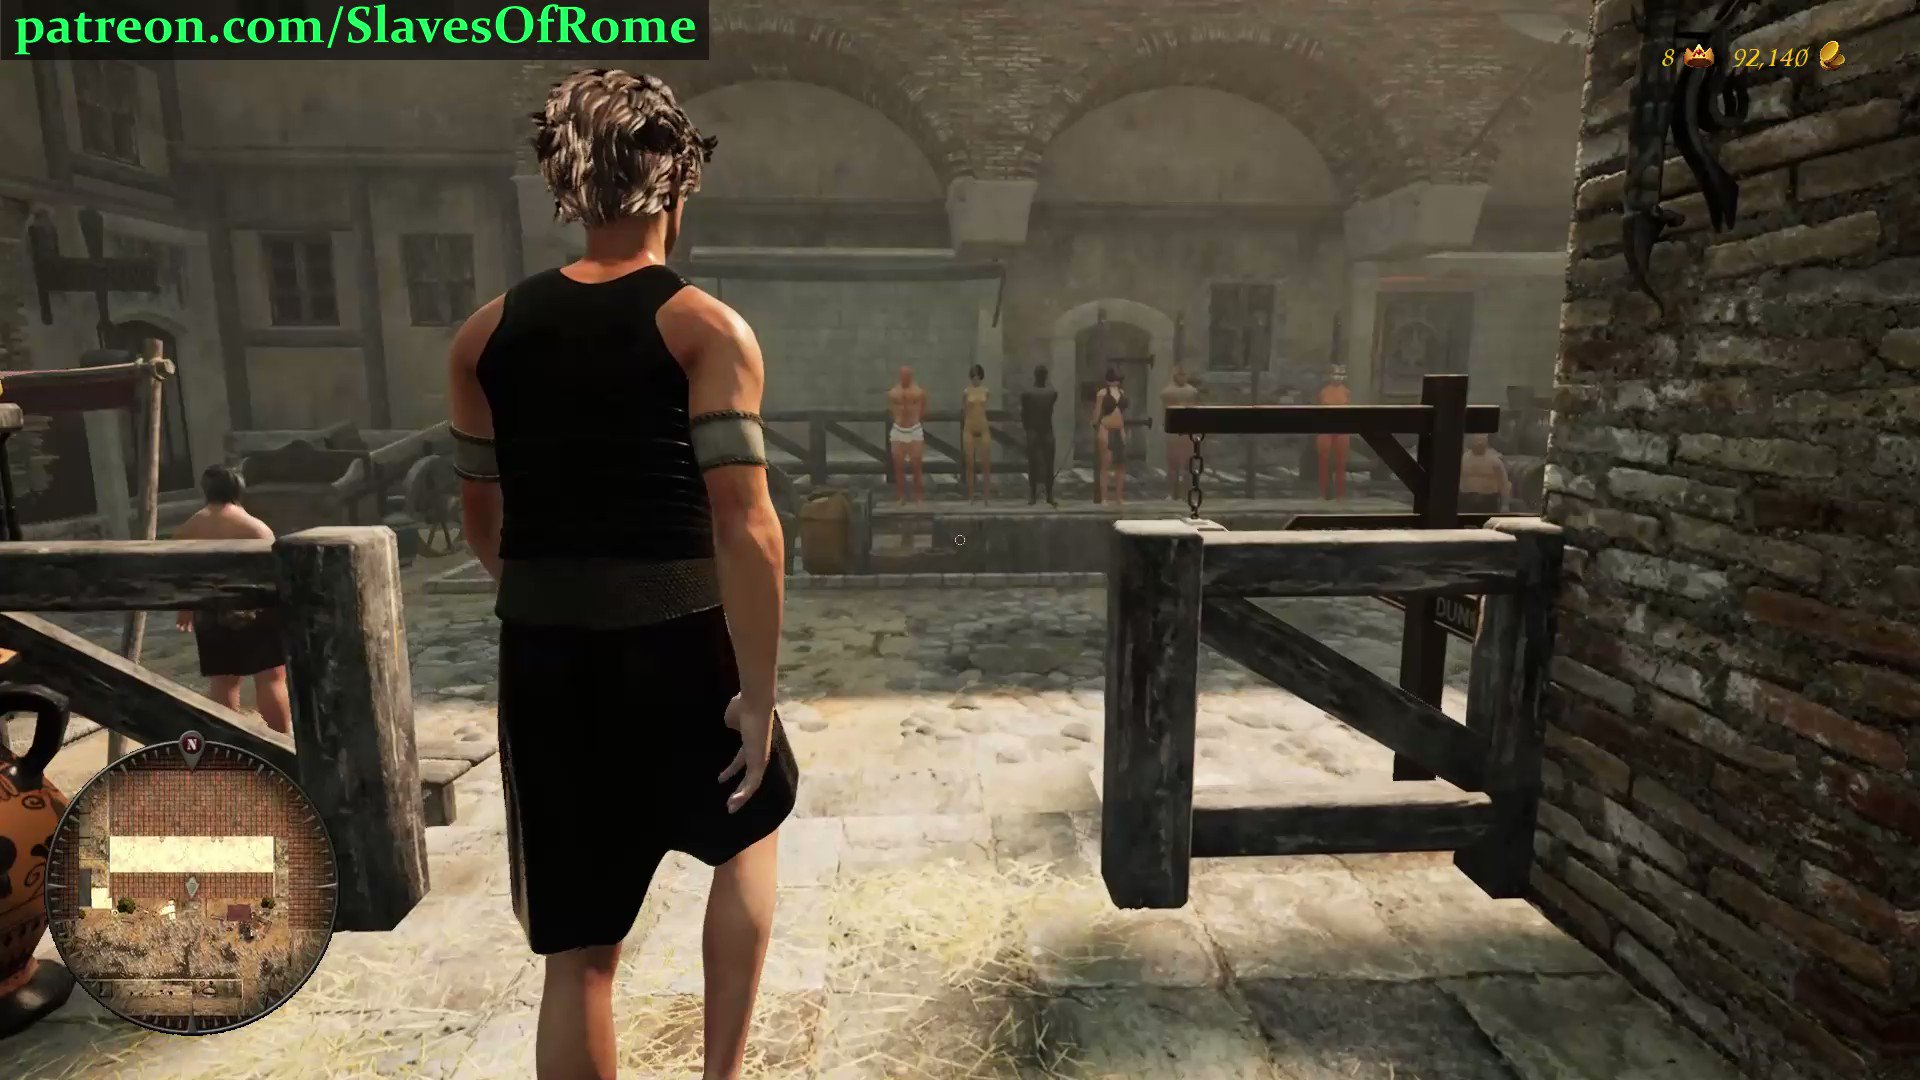 Slaves of Rome on X: NEW v17.1 OUT NOW! Download the game and find out  more on our Patreon: t.co7CBHtF9MMn #nsfwtwt #nsfw #SoR  #SlavesOfRome #3DPorn #VRPorn #bdsm #sexgame #porngame #sexslave #bdsmtwt  t.co75WZmXhHou 